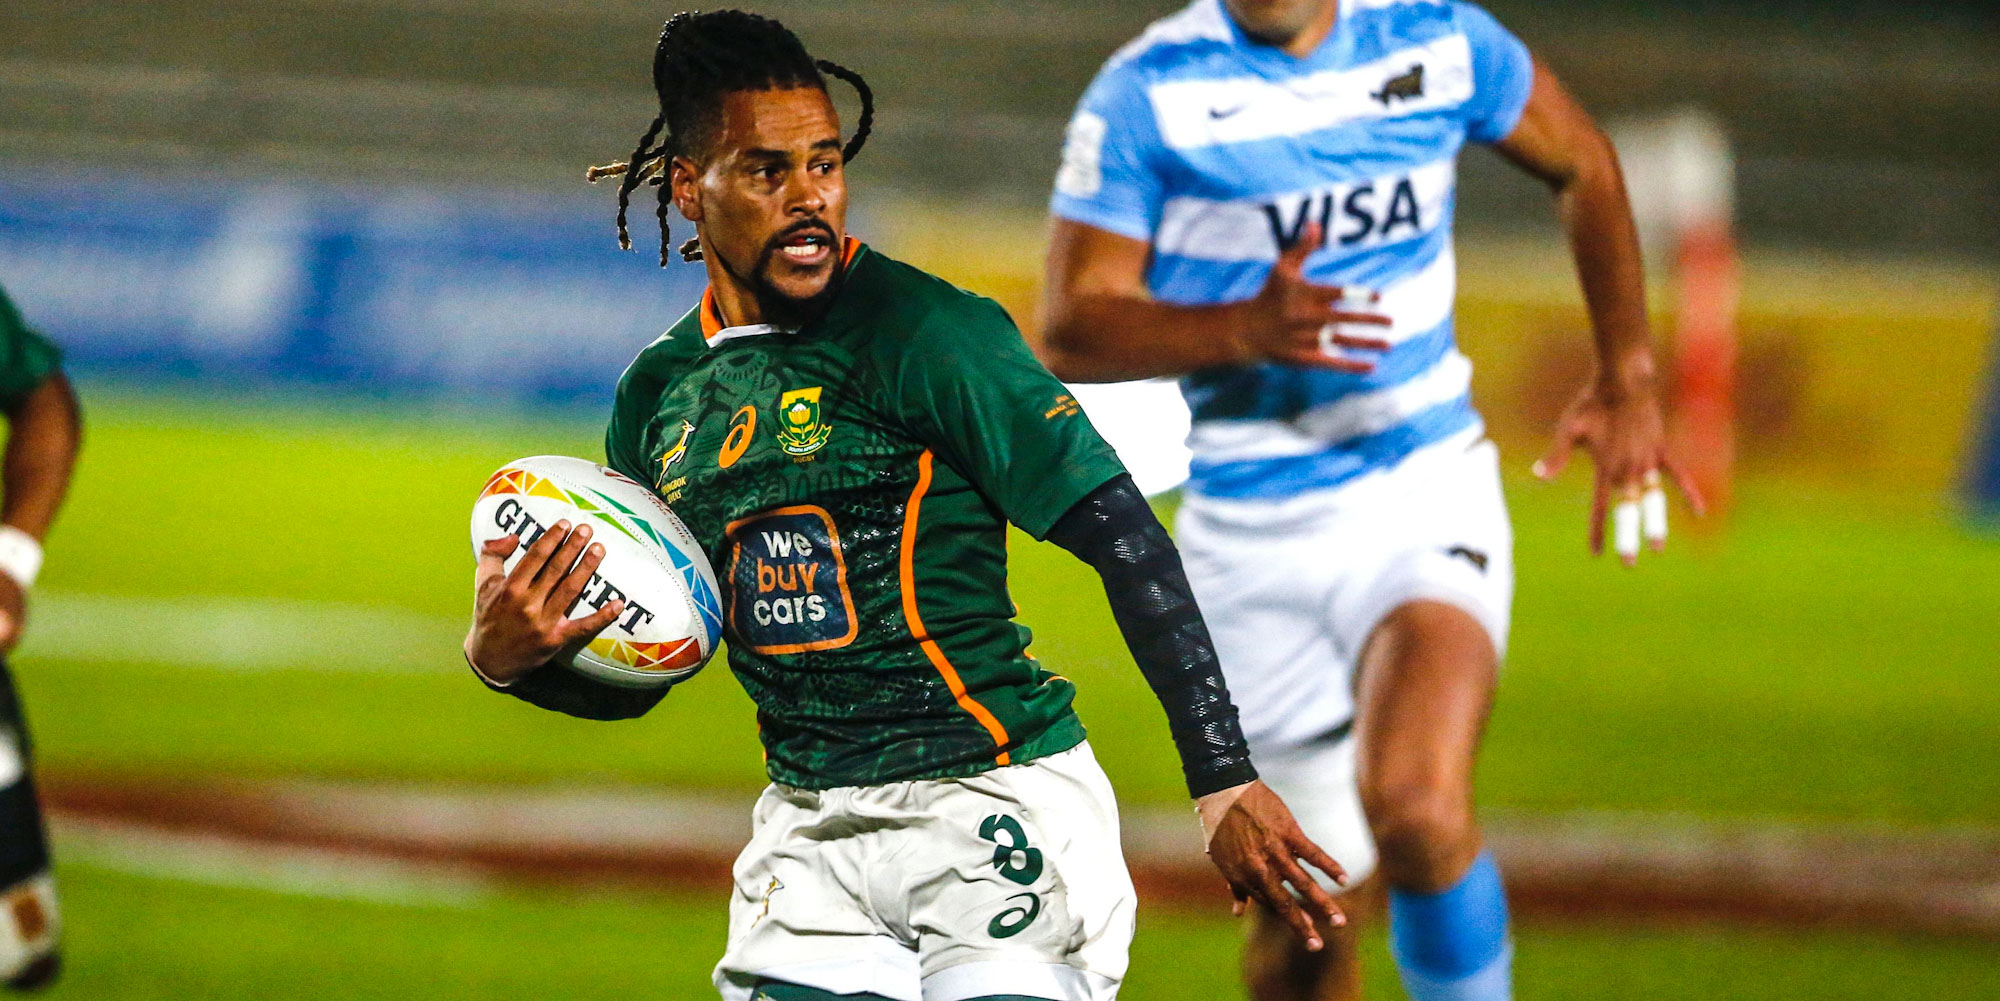 Selvyn Davids is the leading points scorer for the Blitzboks in 2022